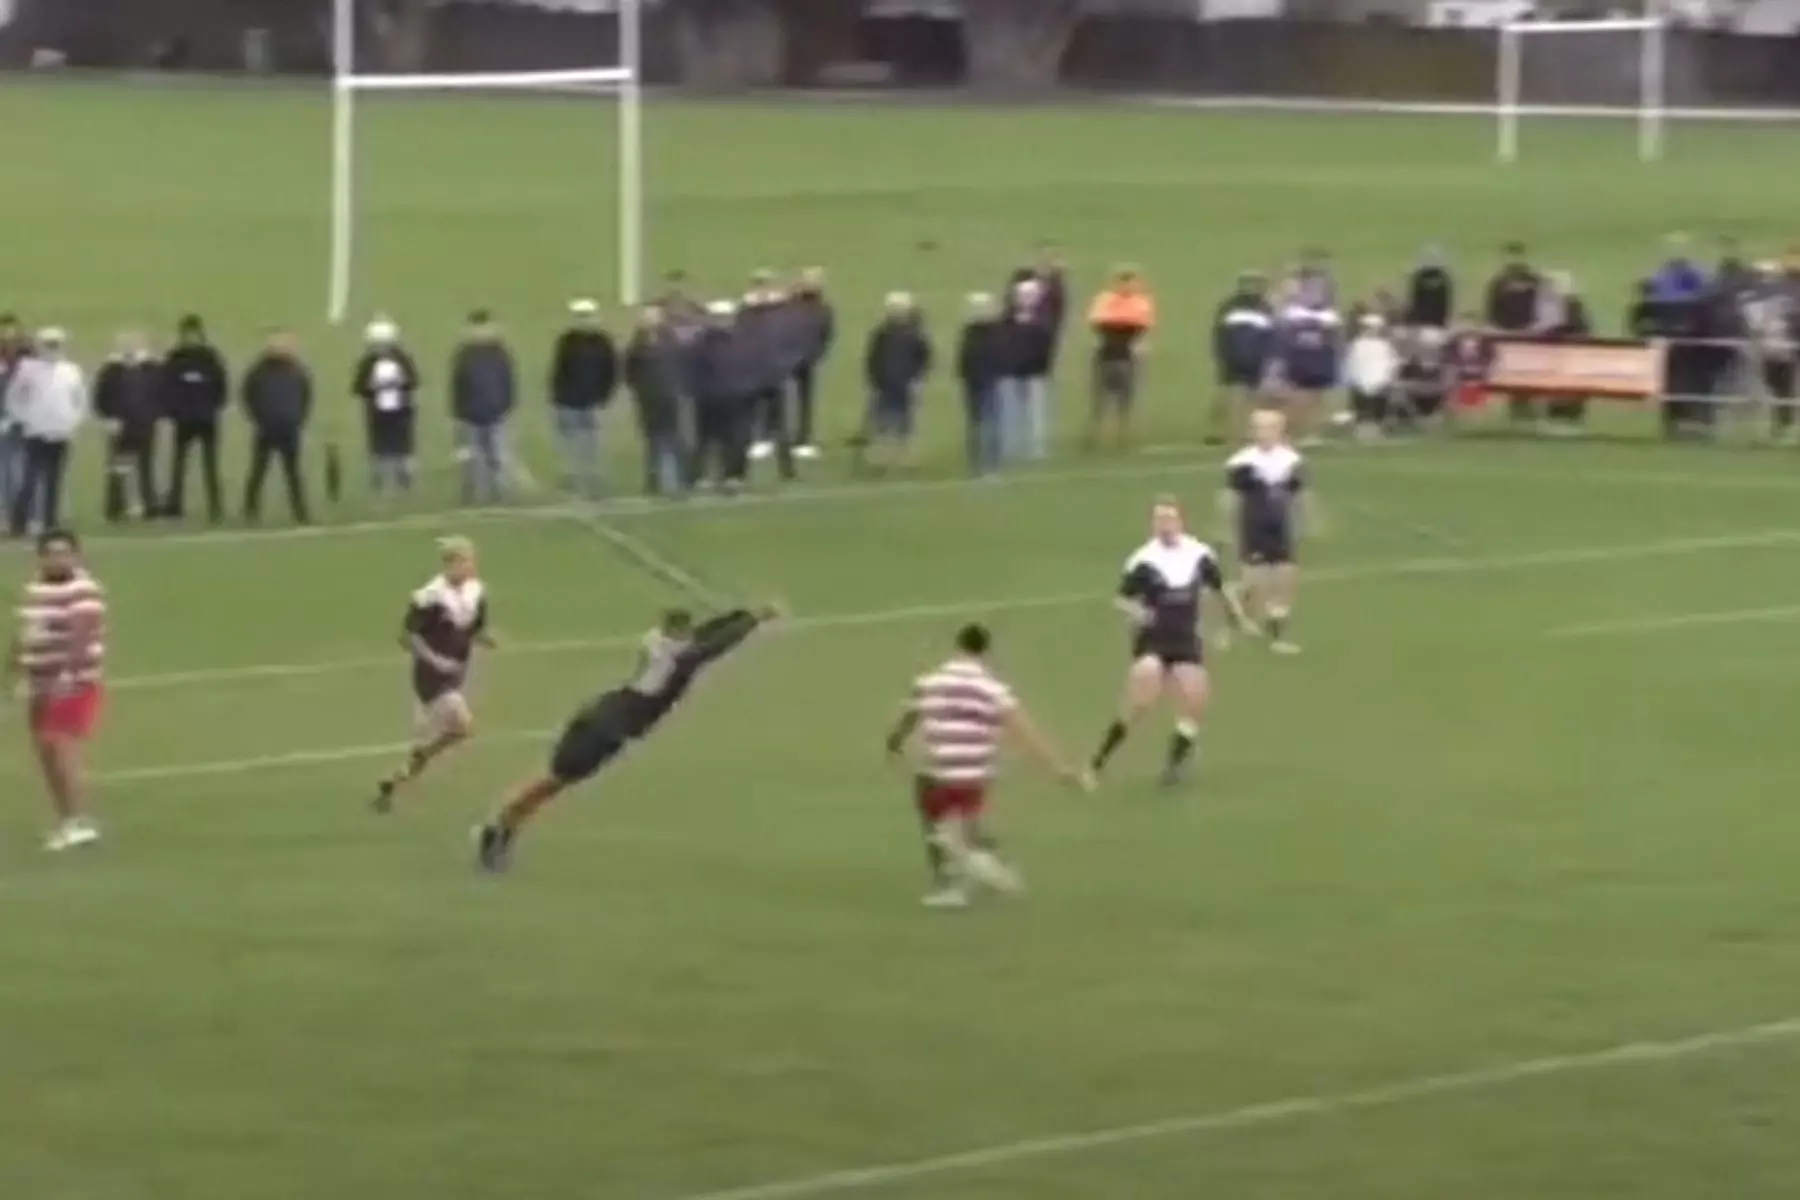 Amazing finish to Wellington club rugby game